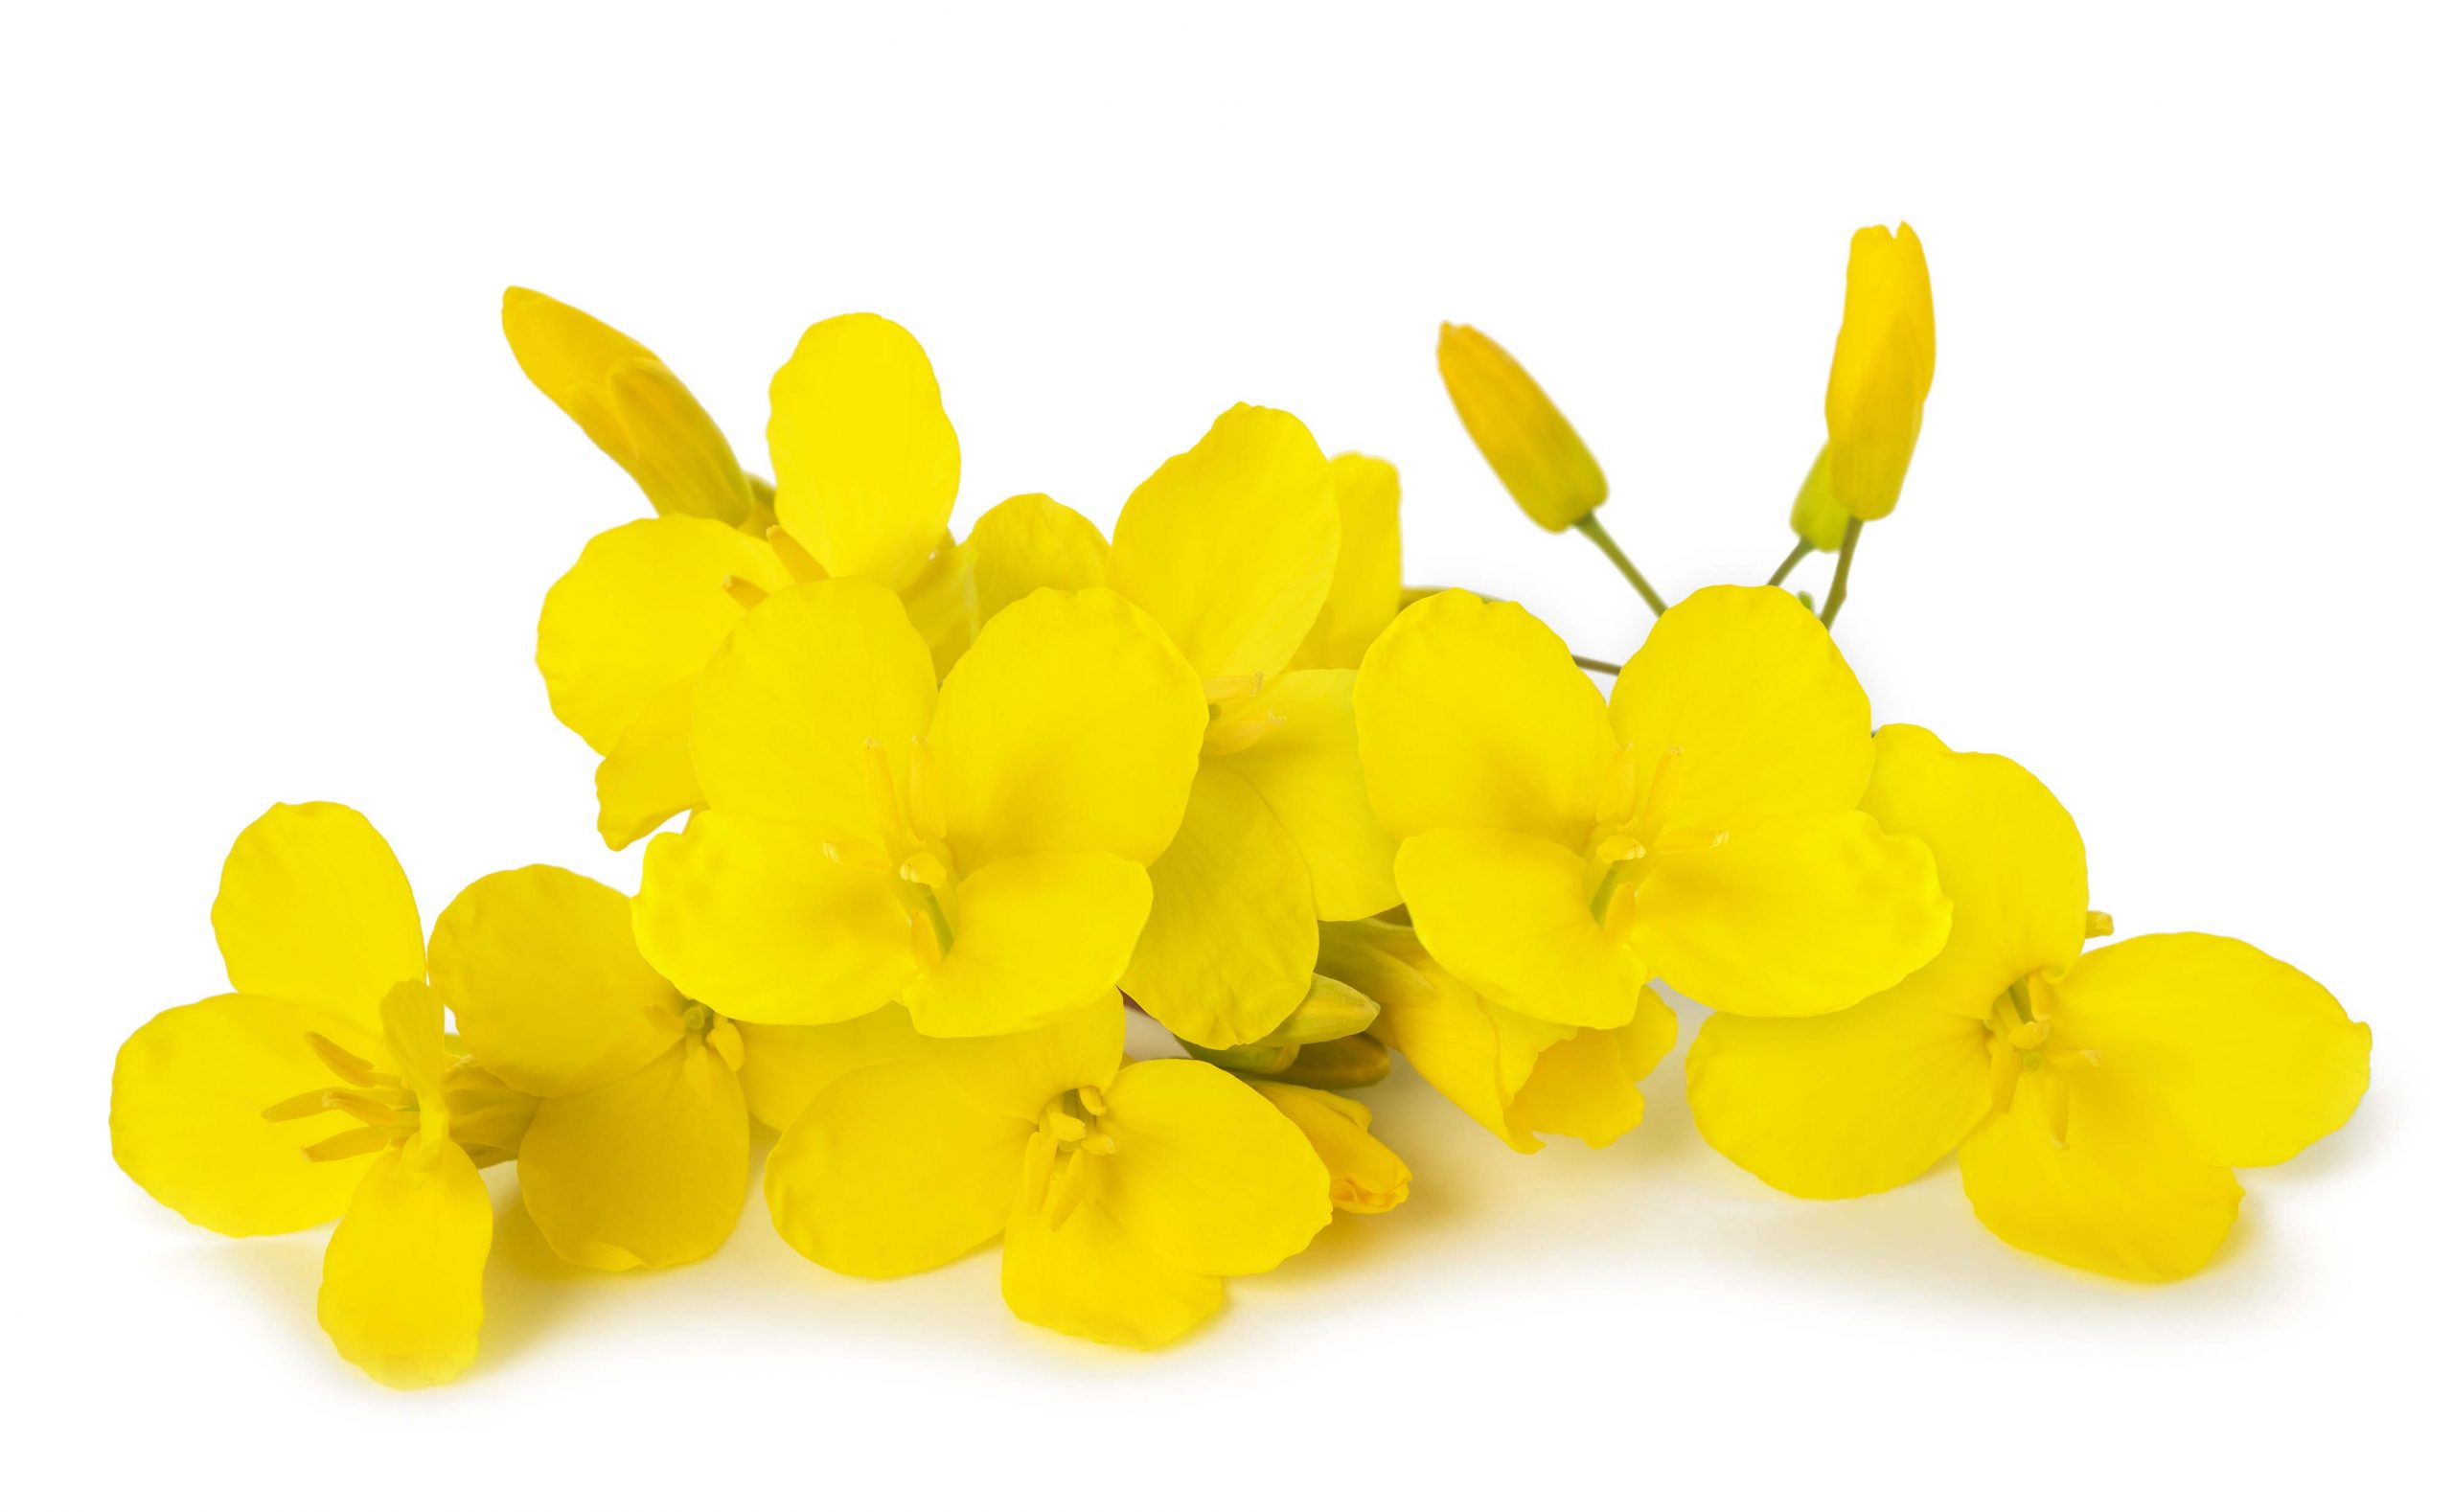 Detailed image of canola flowers on a white background.